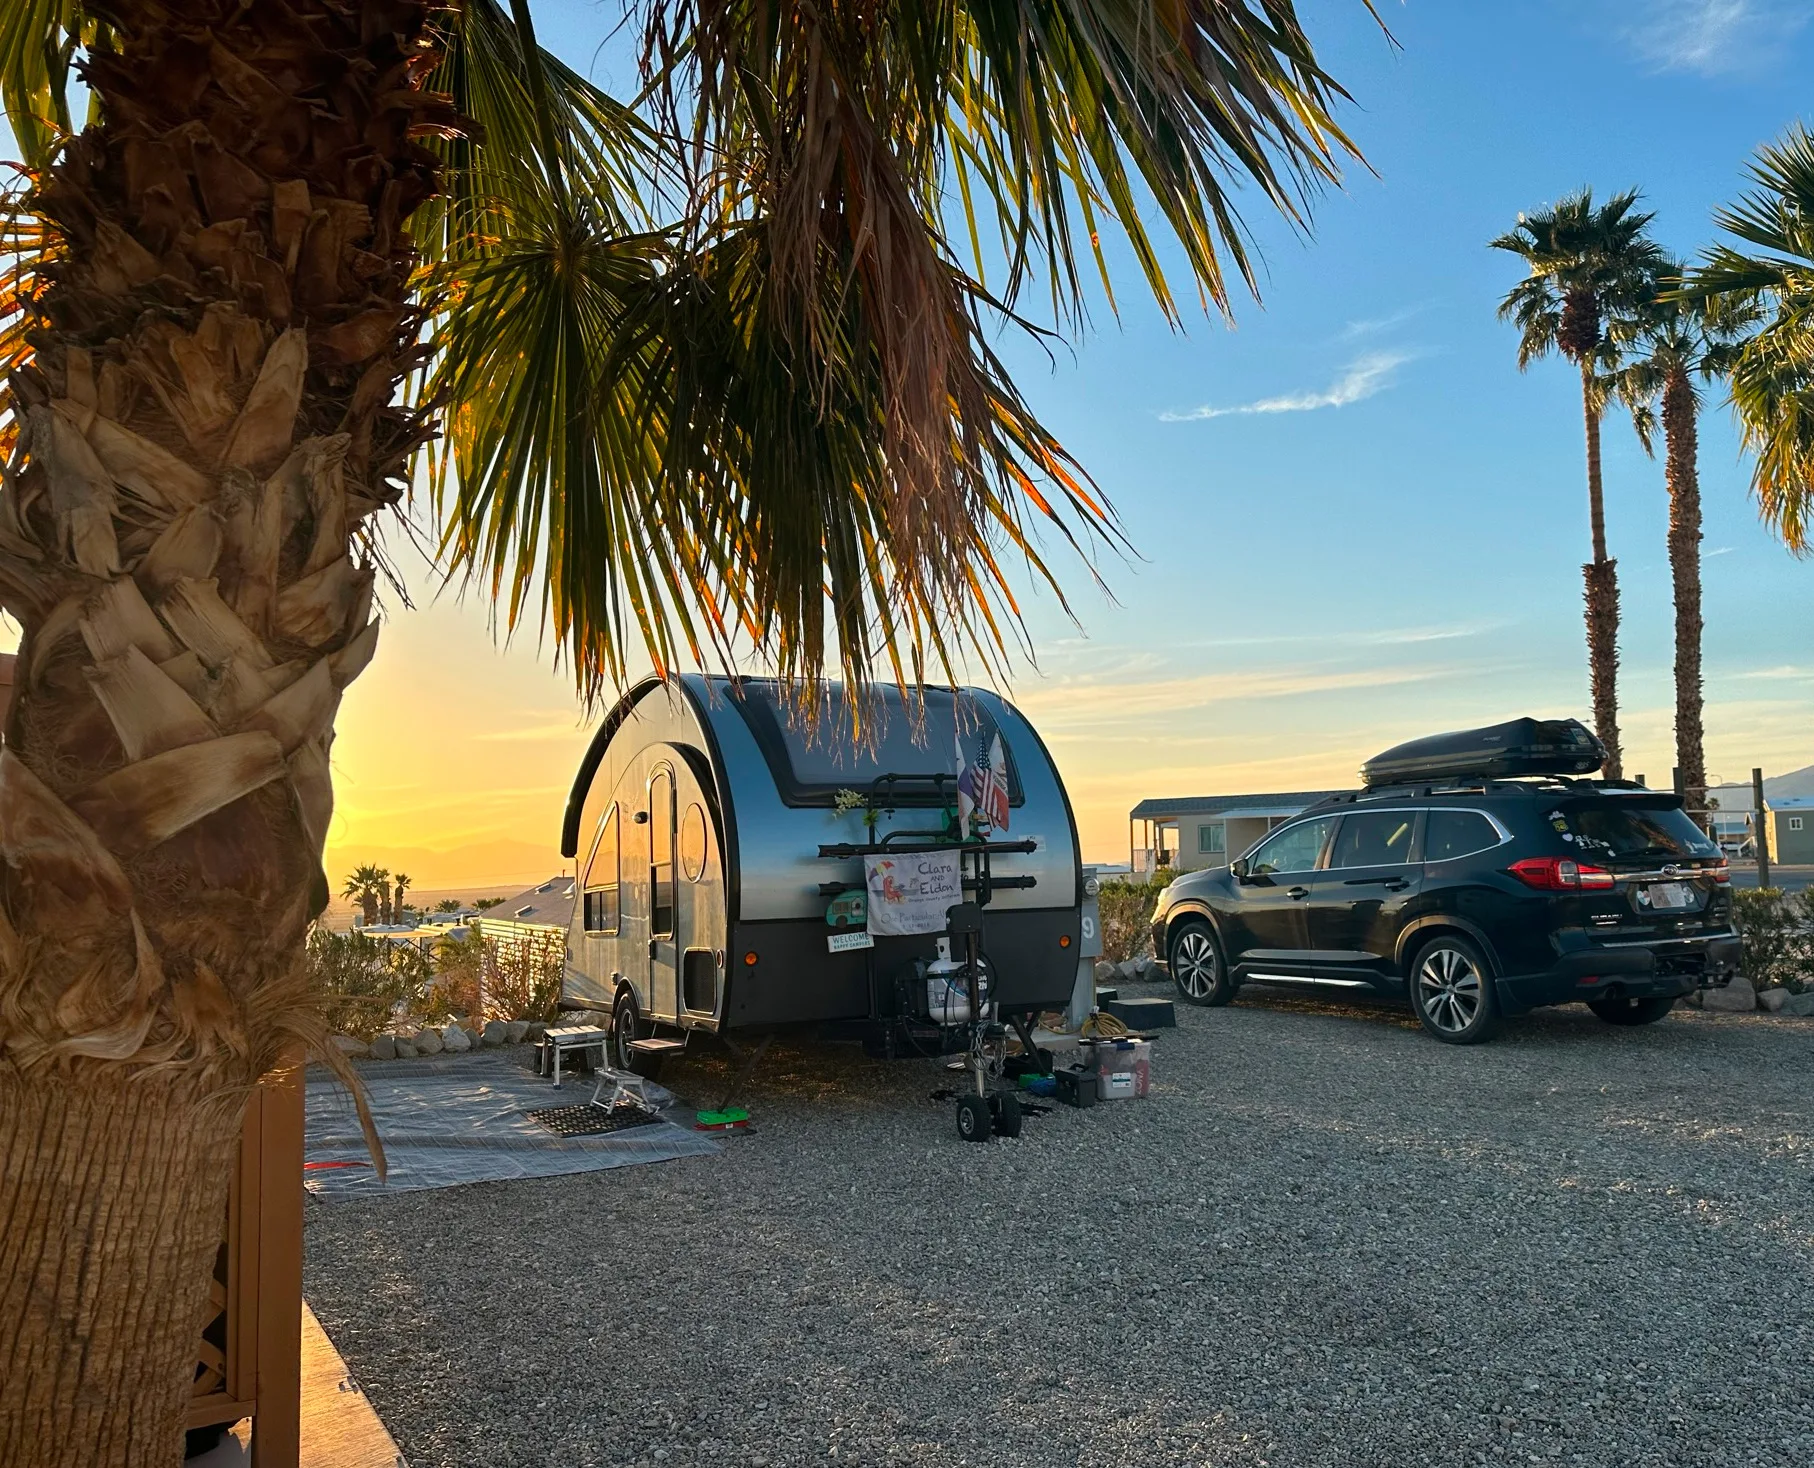 a couple of cars parked in a parking lot next to a palm tree and a camper on the side of the road